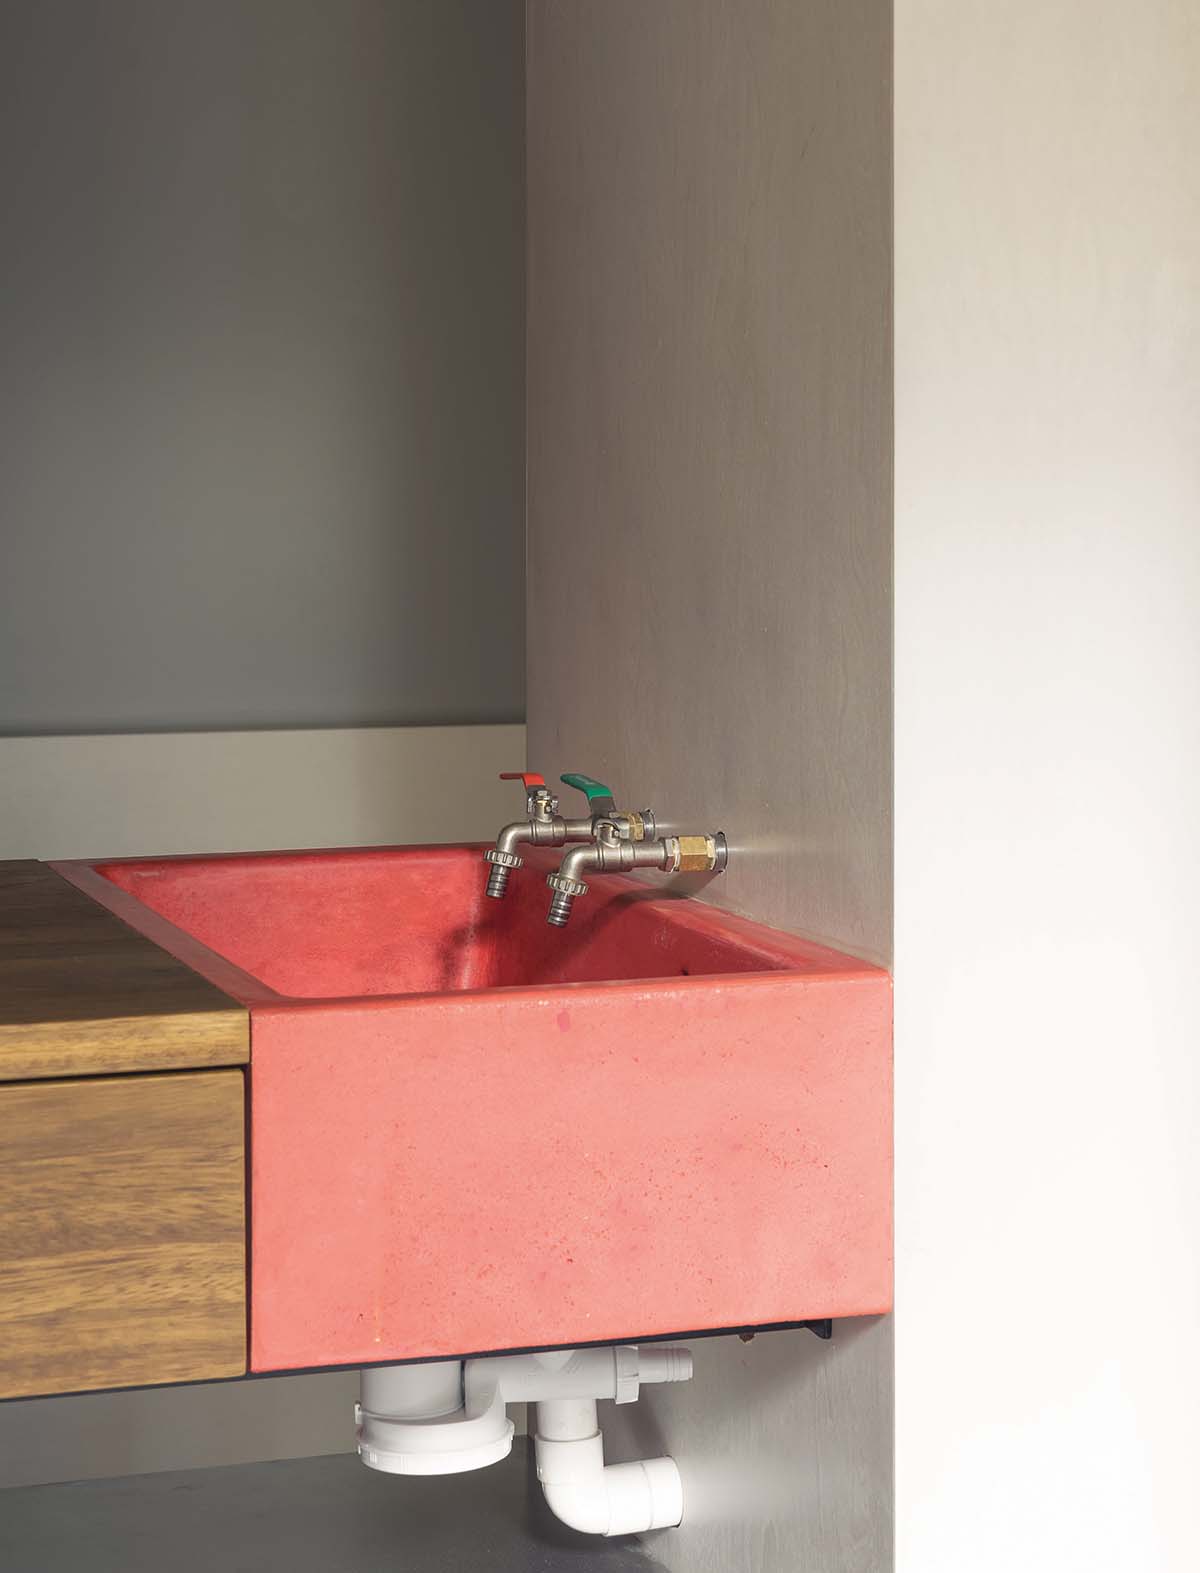 Red sink with wooden countertop